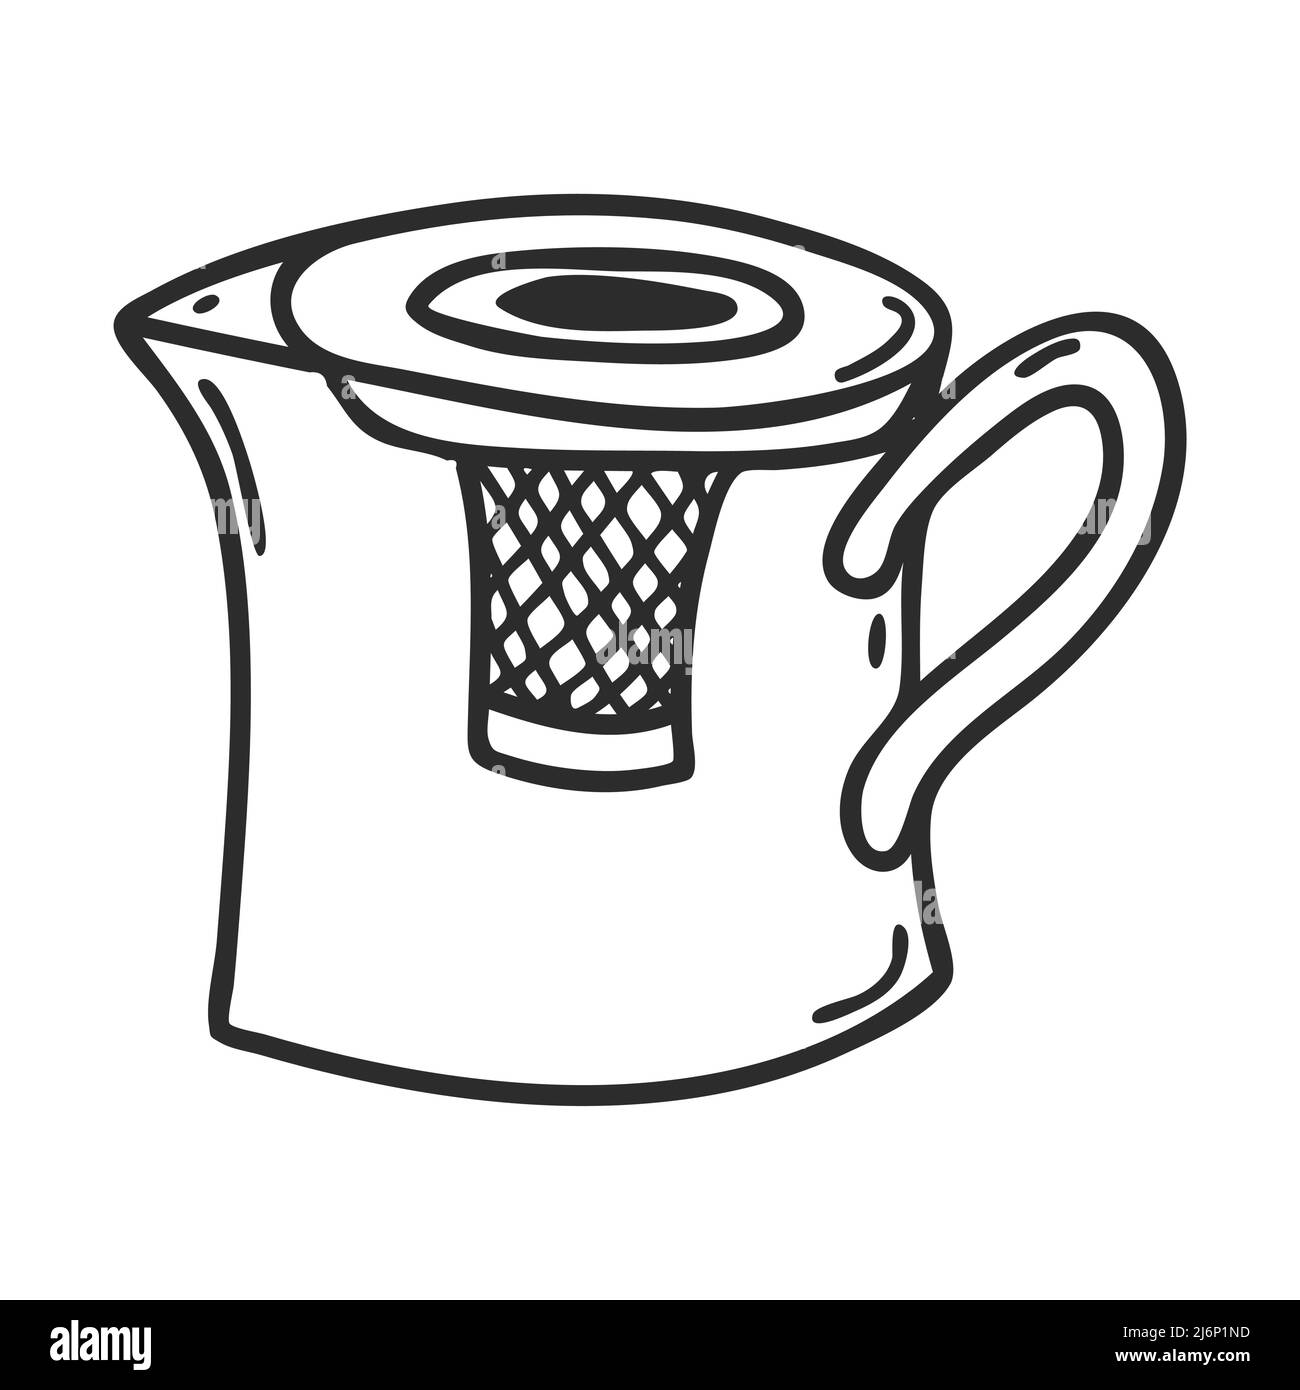 Kettle for making tea in Doodle style.Kitchen appliance for making tea.Decorative element for menu design, recipes, and food packaging. Hand-drawn and Stock Vector